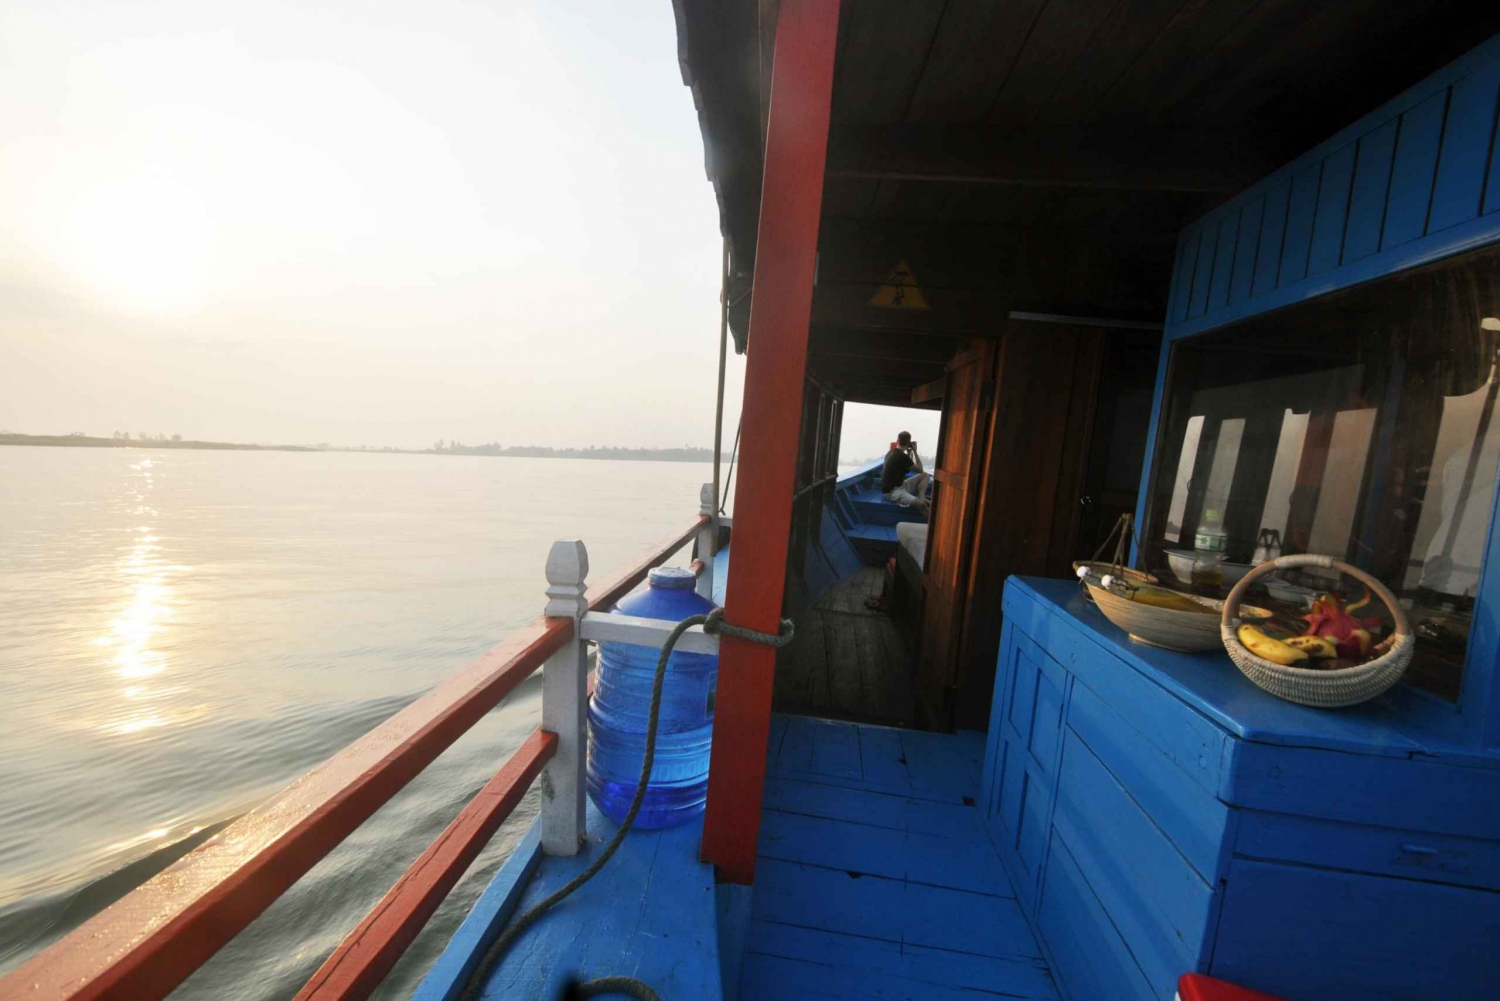 From Hoi An: Sunrise Boat Trip Tour